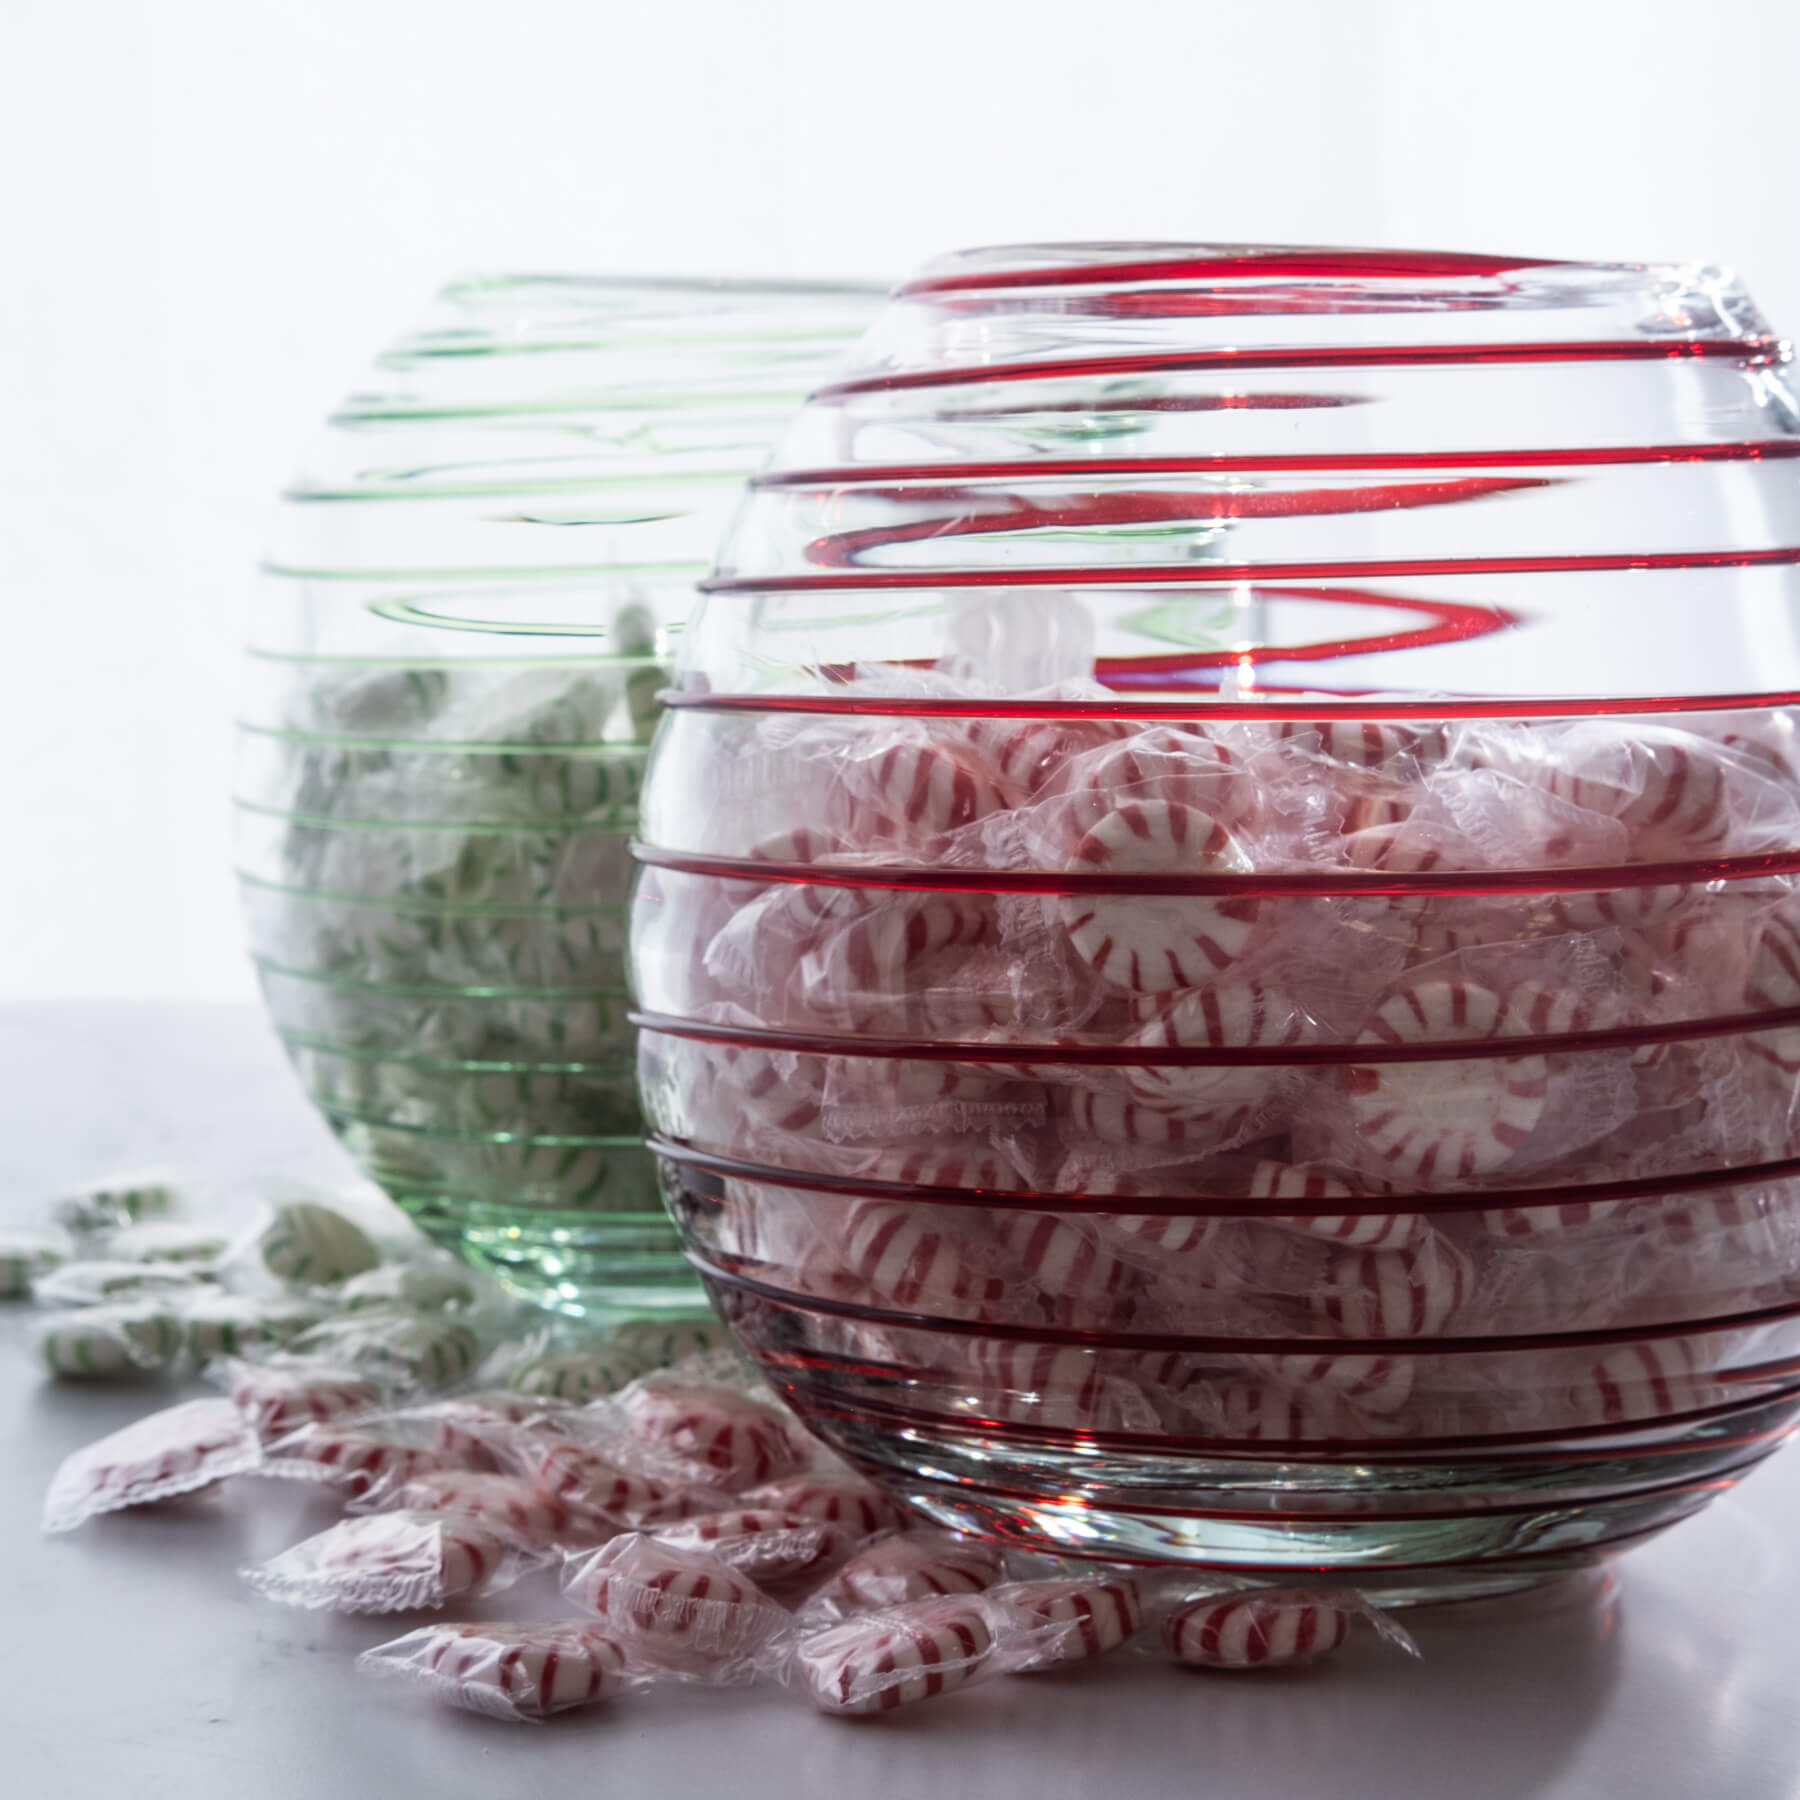 2923 Hard Candy Christmas Bowl - Crystal with Ruby spiral